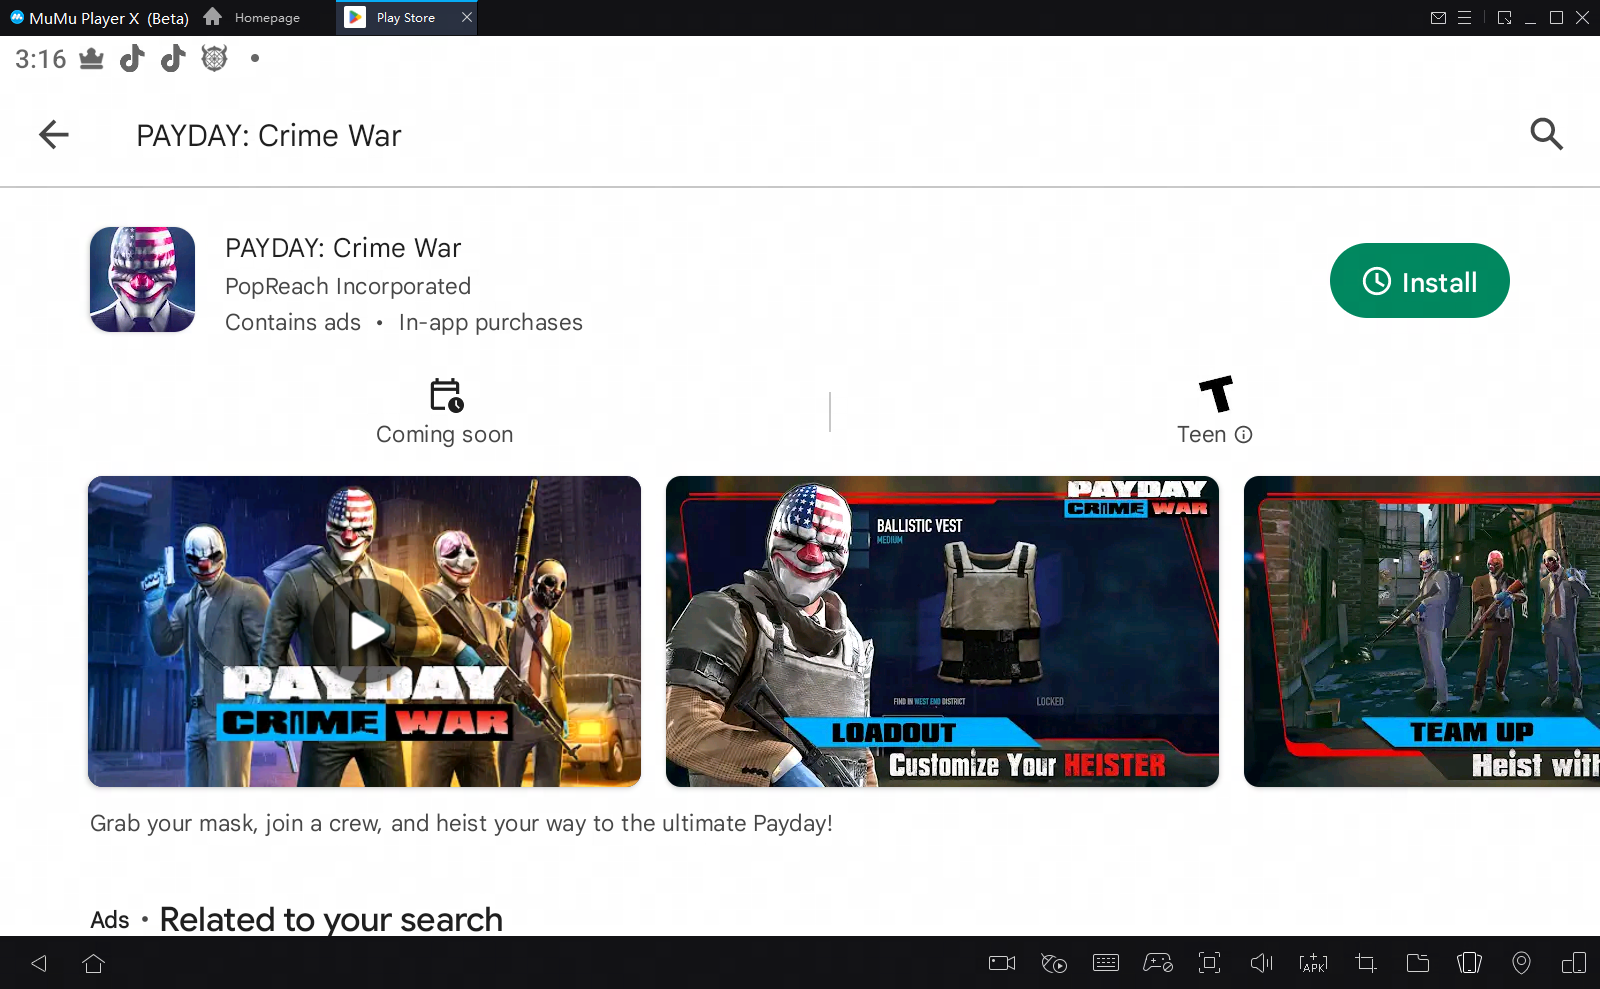 PAYDAY: Crime War on PC